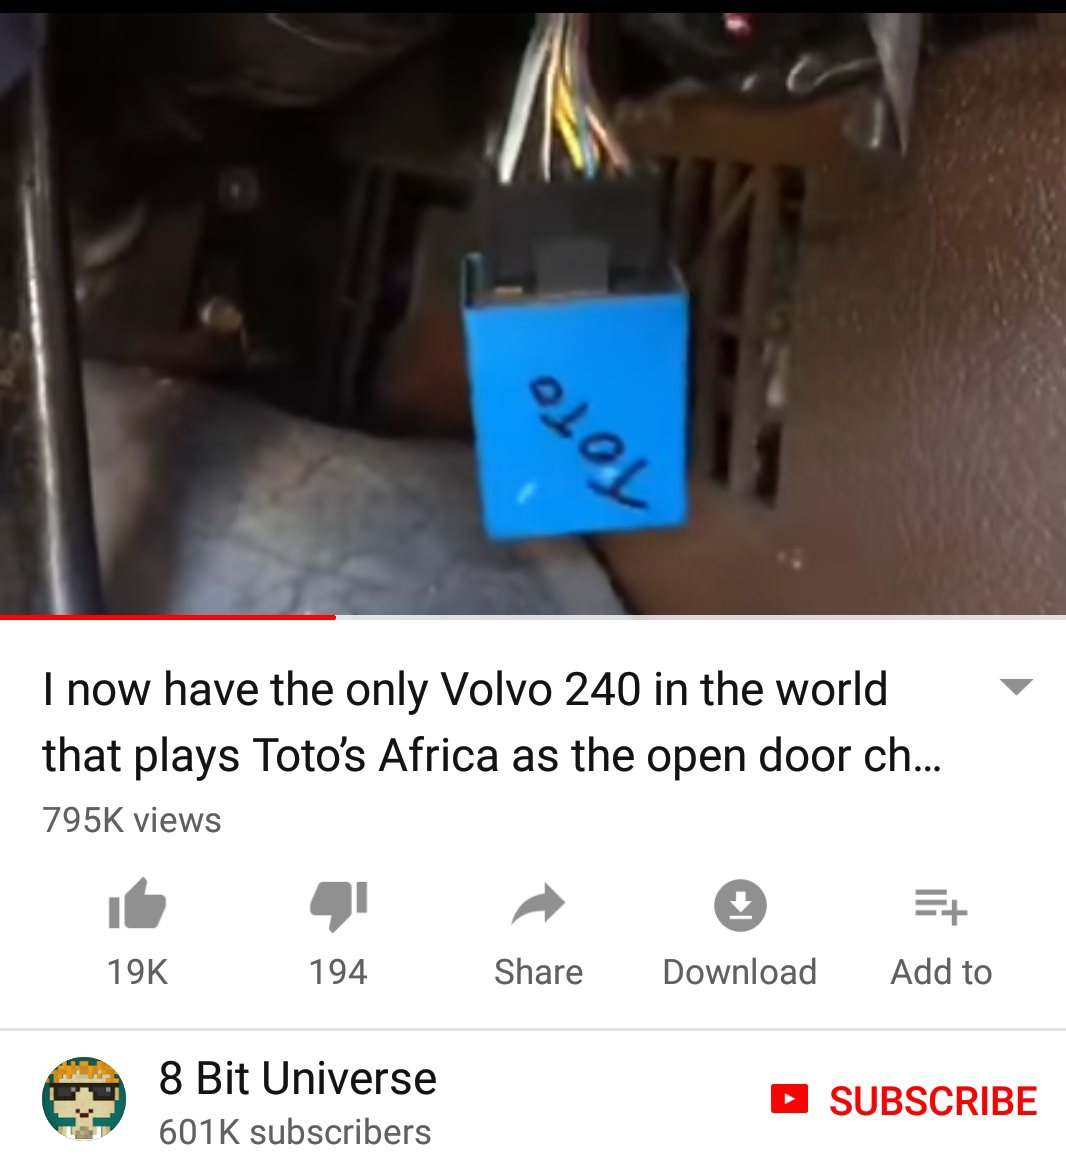 Toto - I now have the only Volvo 240 in the world that plays Toto's Africa as the open door ch... views 19K 194 Download Add to 8 Bit Universe subscribers Subscribe